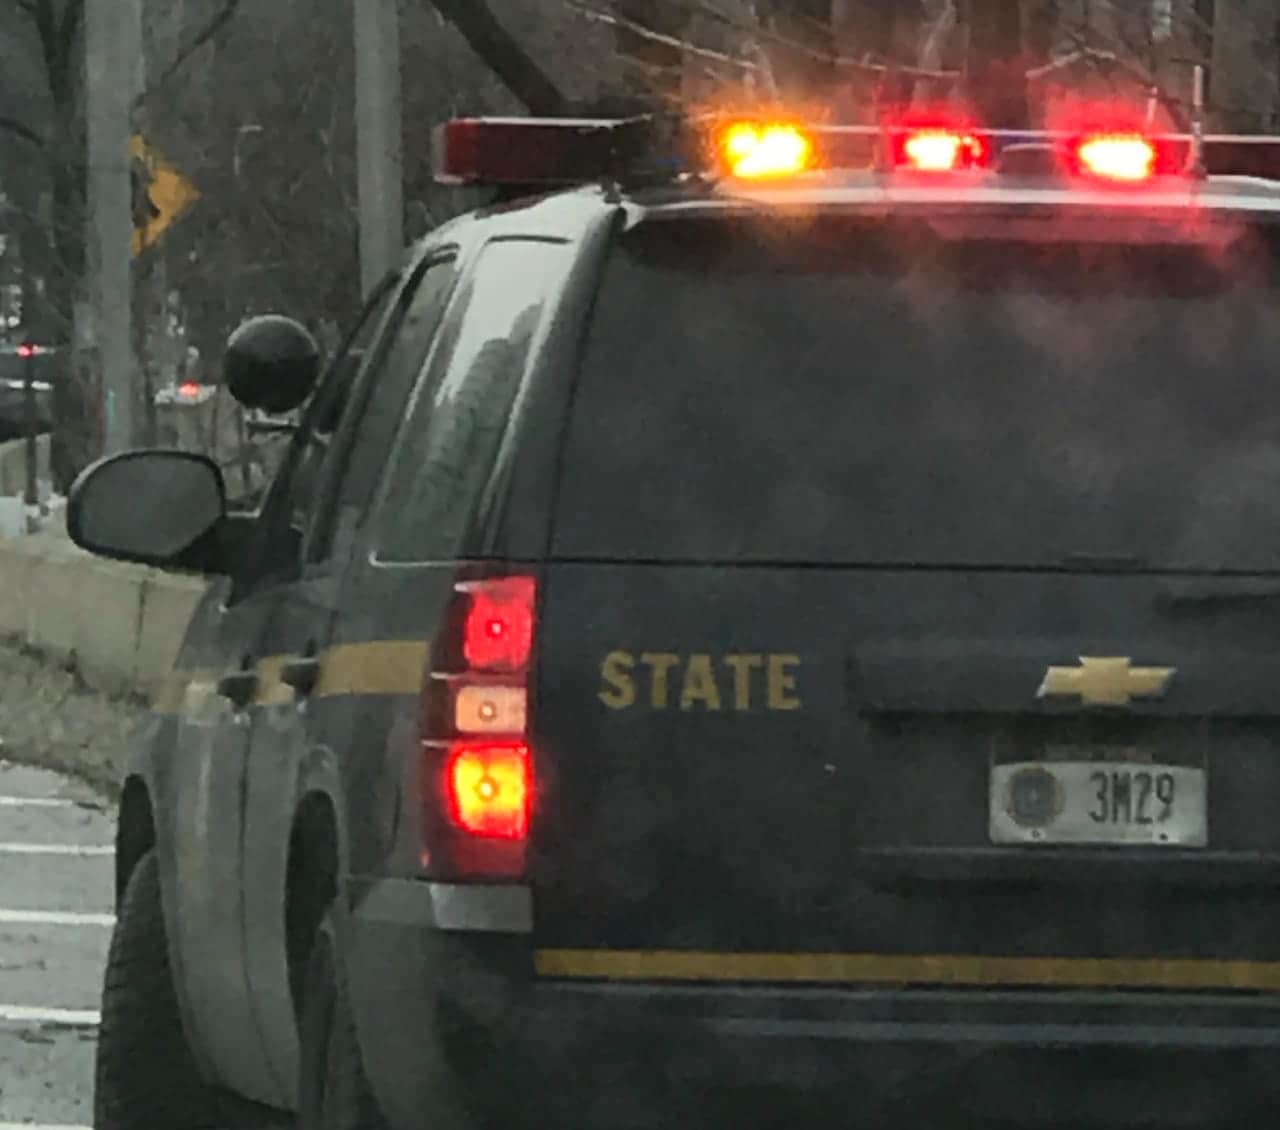 A 26-year-old man was arrested by state troopers in Putnam county after he was found in possession of a stolen, loaded 9mm semi-automatic handgun during a traffic stop, said police.